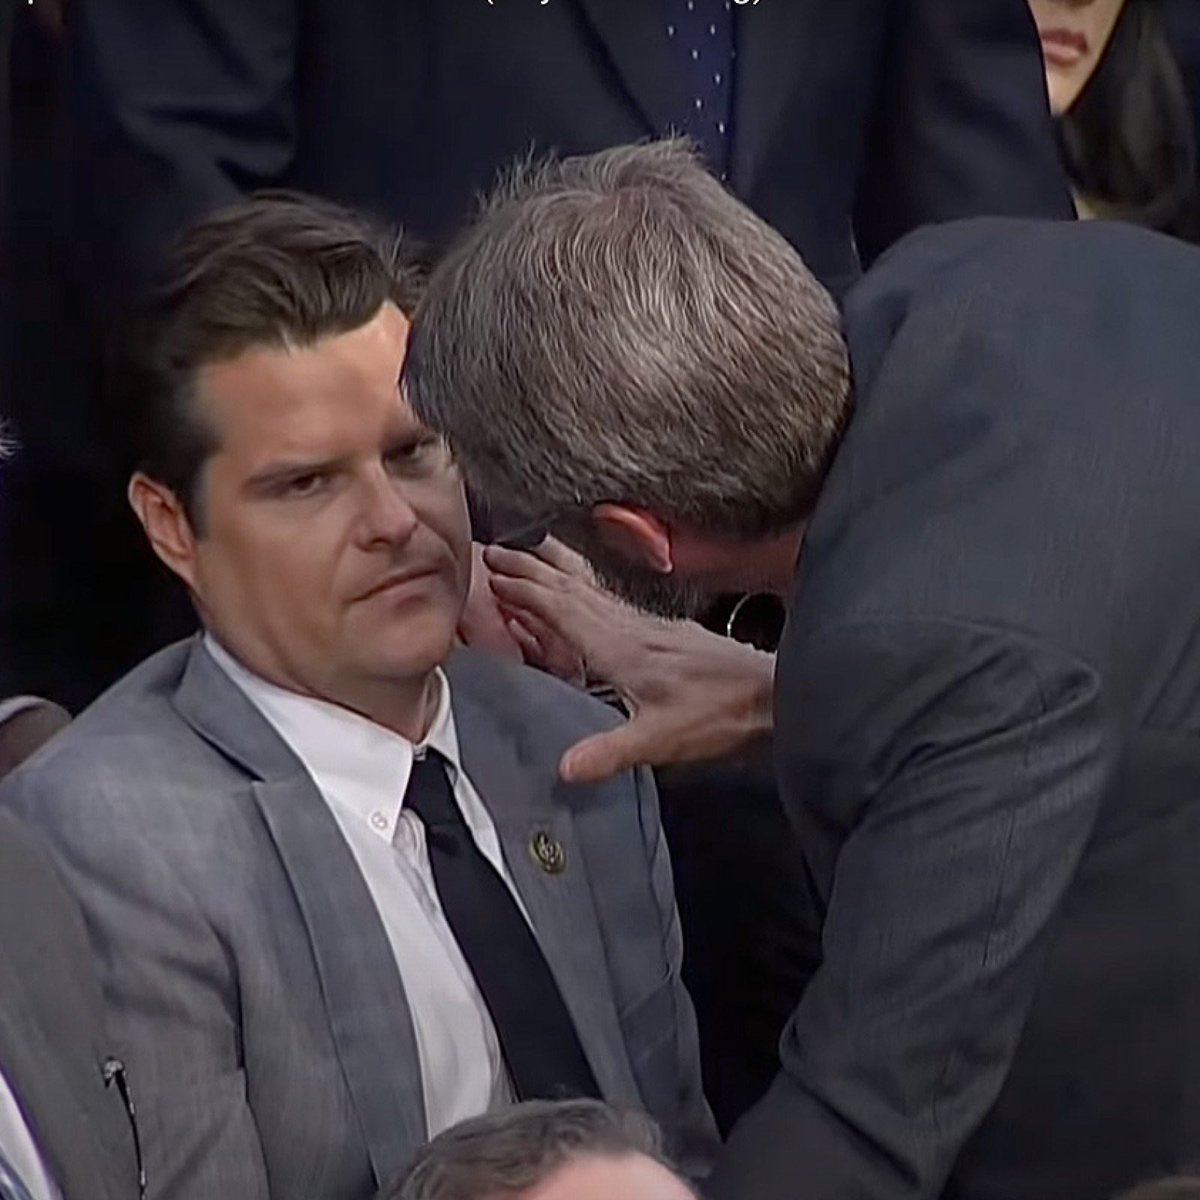 Somehow I believe this moment, and the fact that the ethics committee reopening the investigation into Gaetz are related. 

I’m 100% convinced.